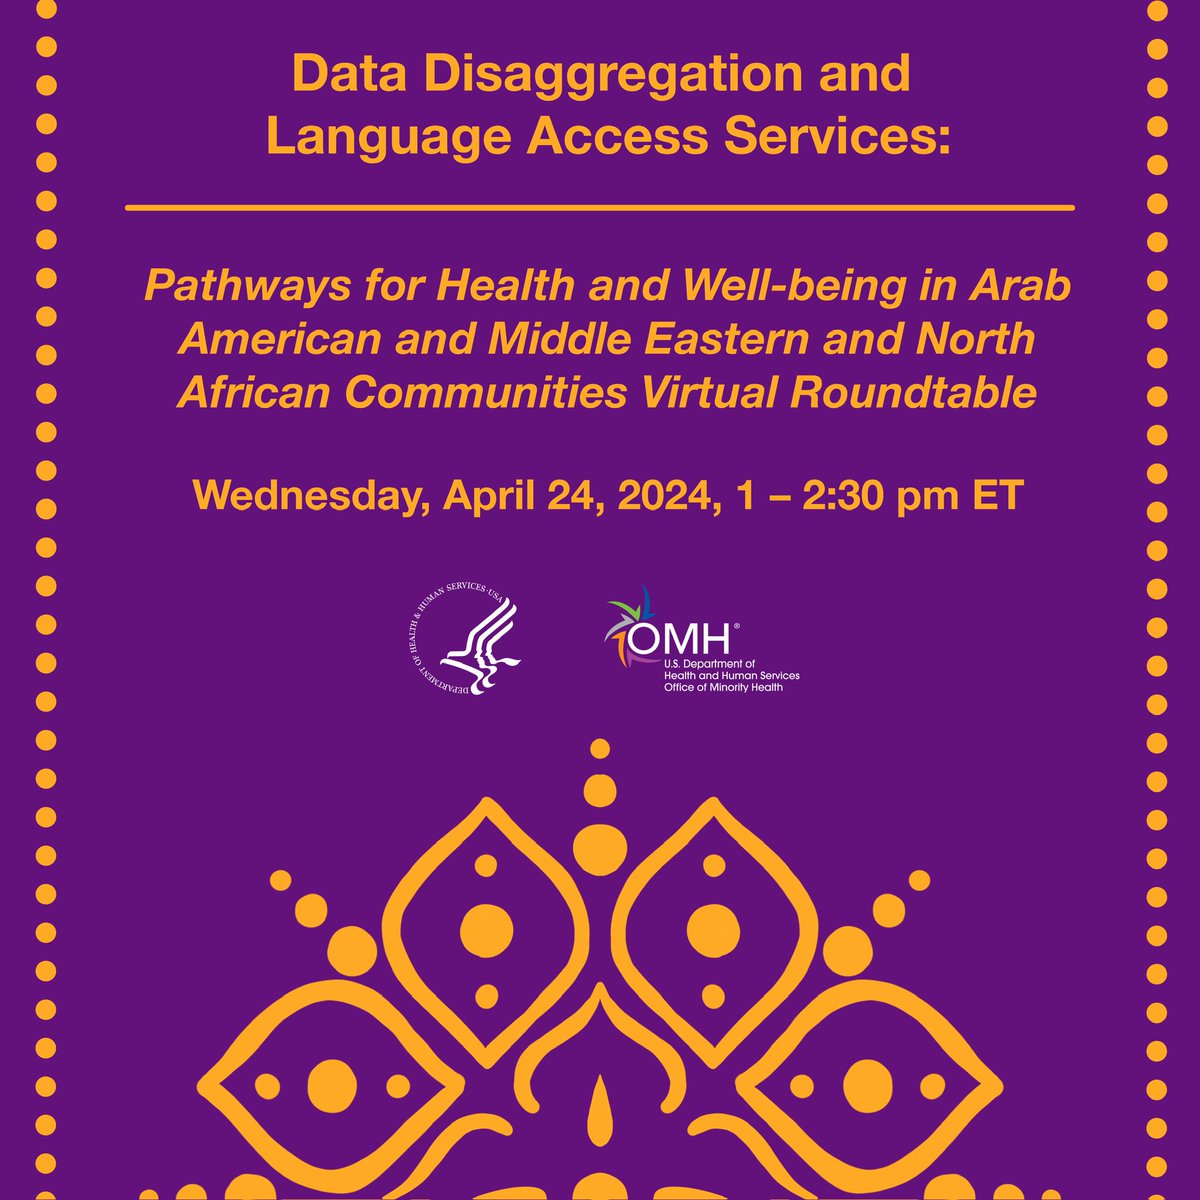 Announcing the last webinar in the #AAHM series: on Wednesday, April 24, from 1 – 2:30 PM ET, the Office of Minority Health (OMH) will host a virtual roundtable discussing opportunities for promoting health & addressing health disparities in Arab American and MENA communities.